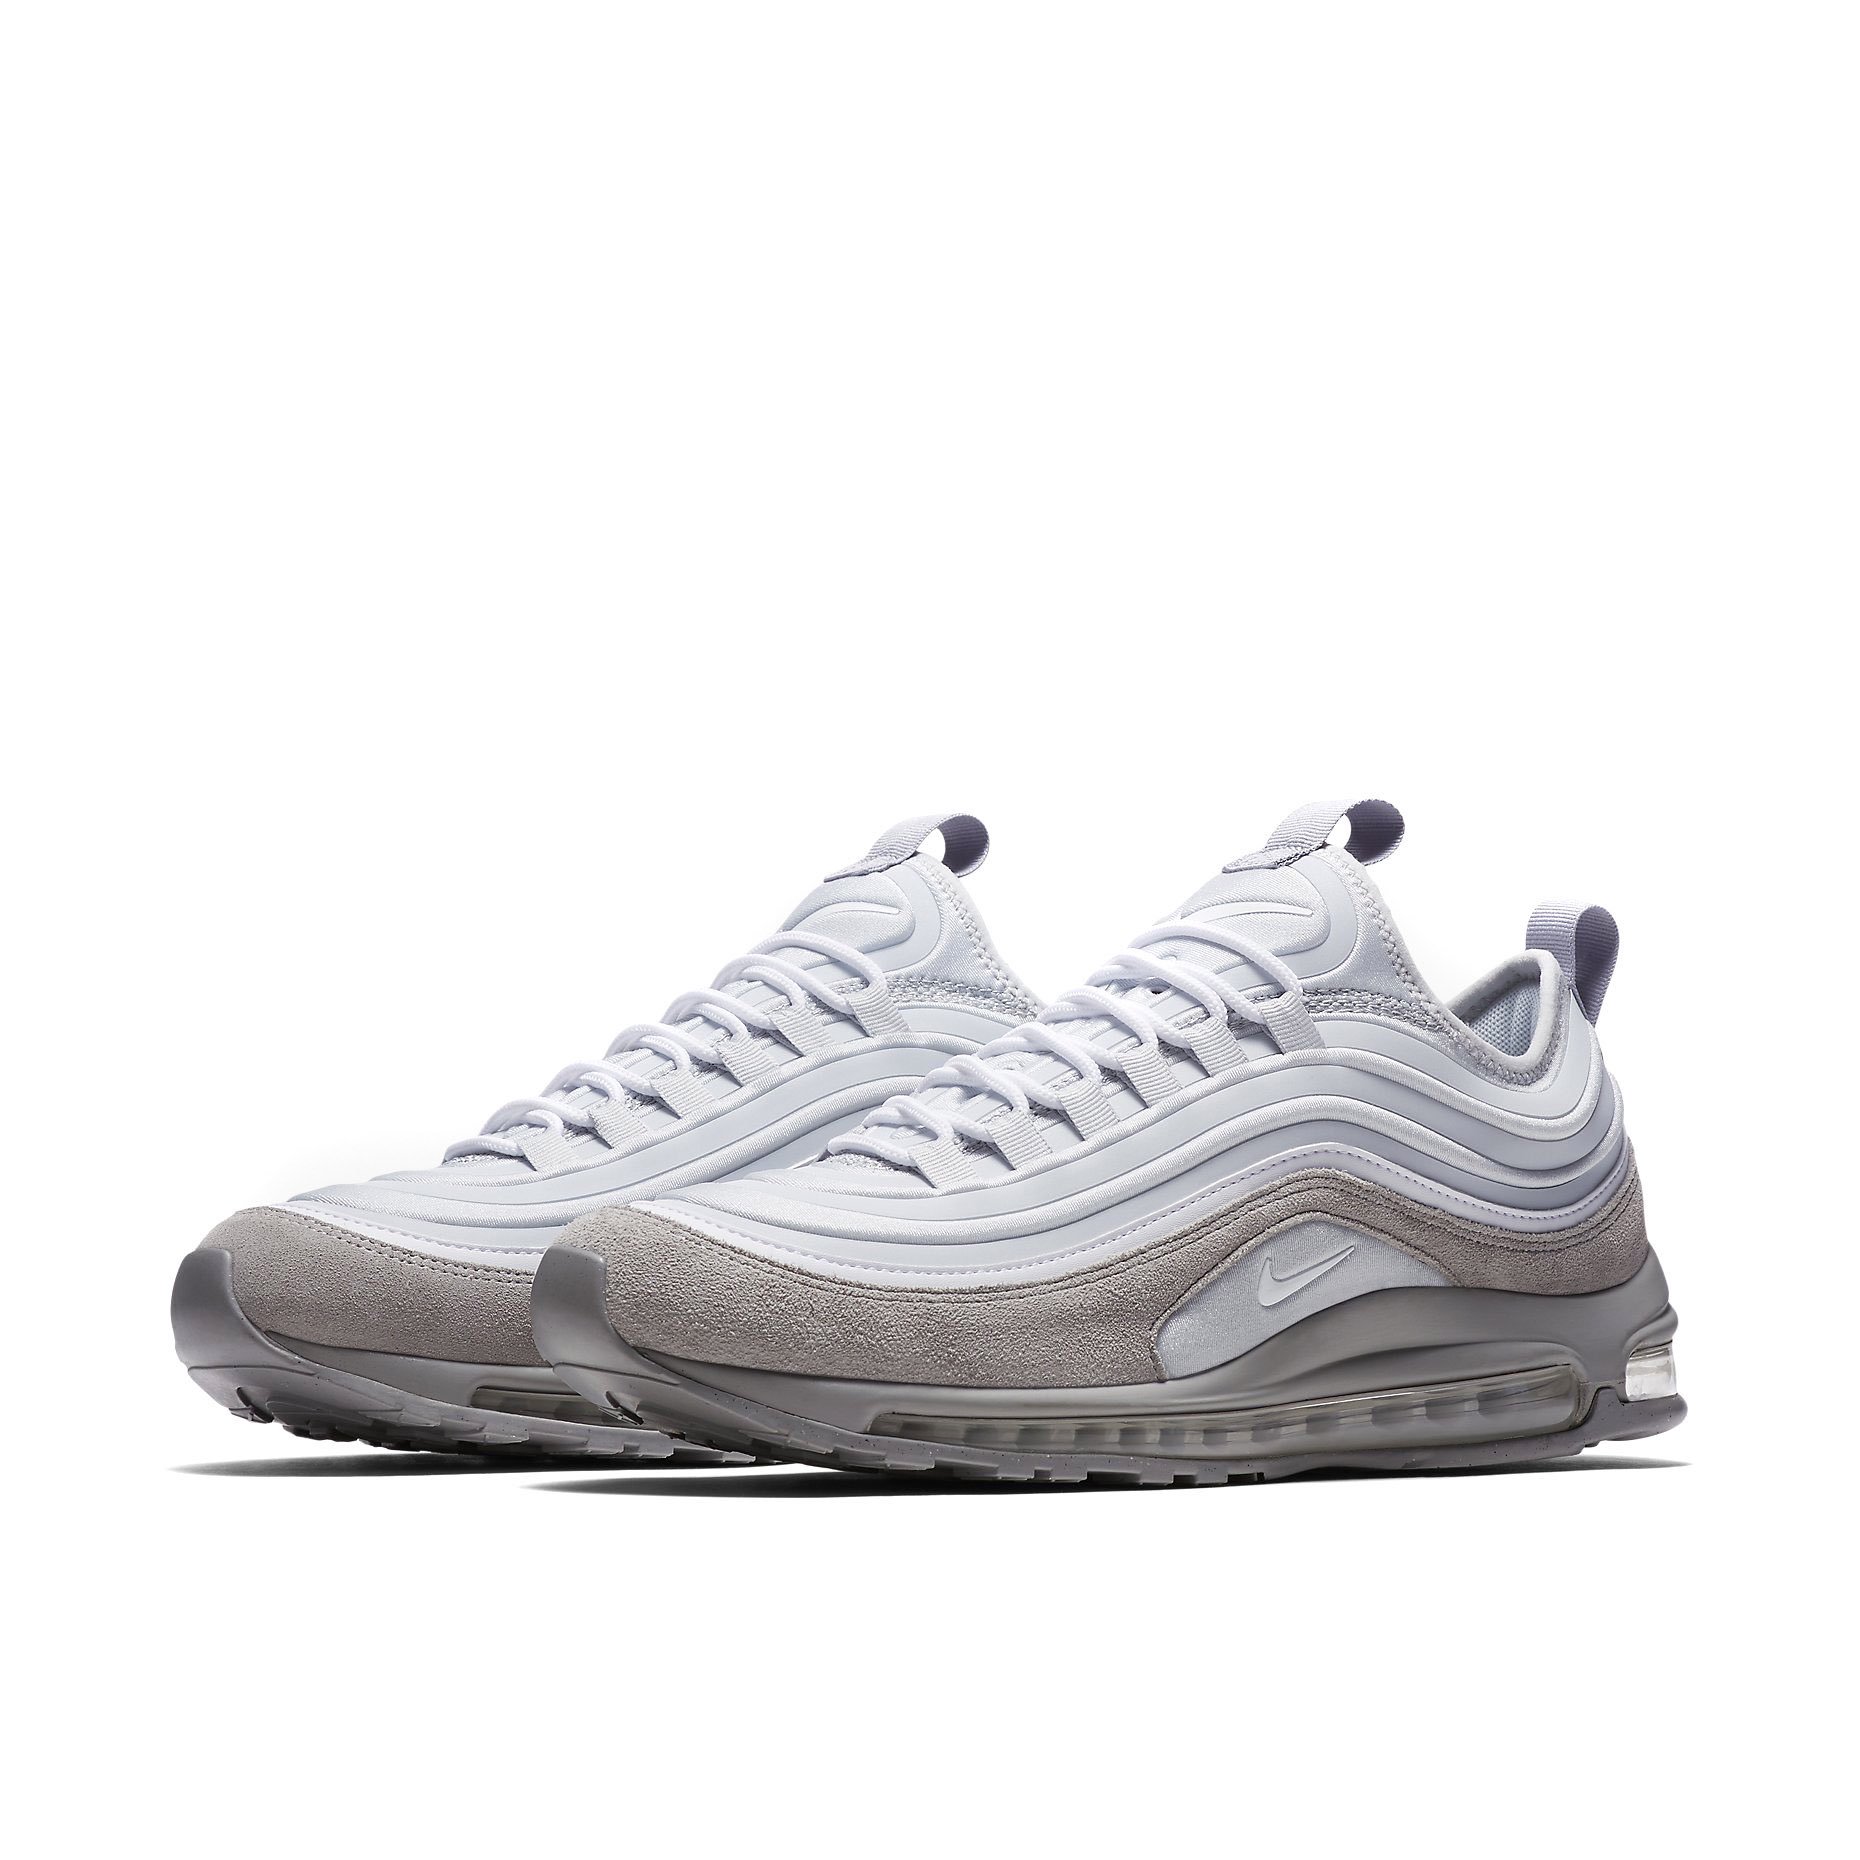 KICKS CREW on Twitter: "Nike Air Max 97 (924452-002) Suede Pure Platinum  USD 130 HKD 1020 Pre Order and Release on 16 Oct https://t.co/lXS7L7KE6r  https://t.co/iIT65iFyyS" / Twitter